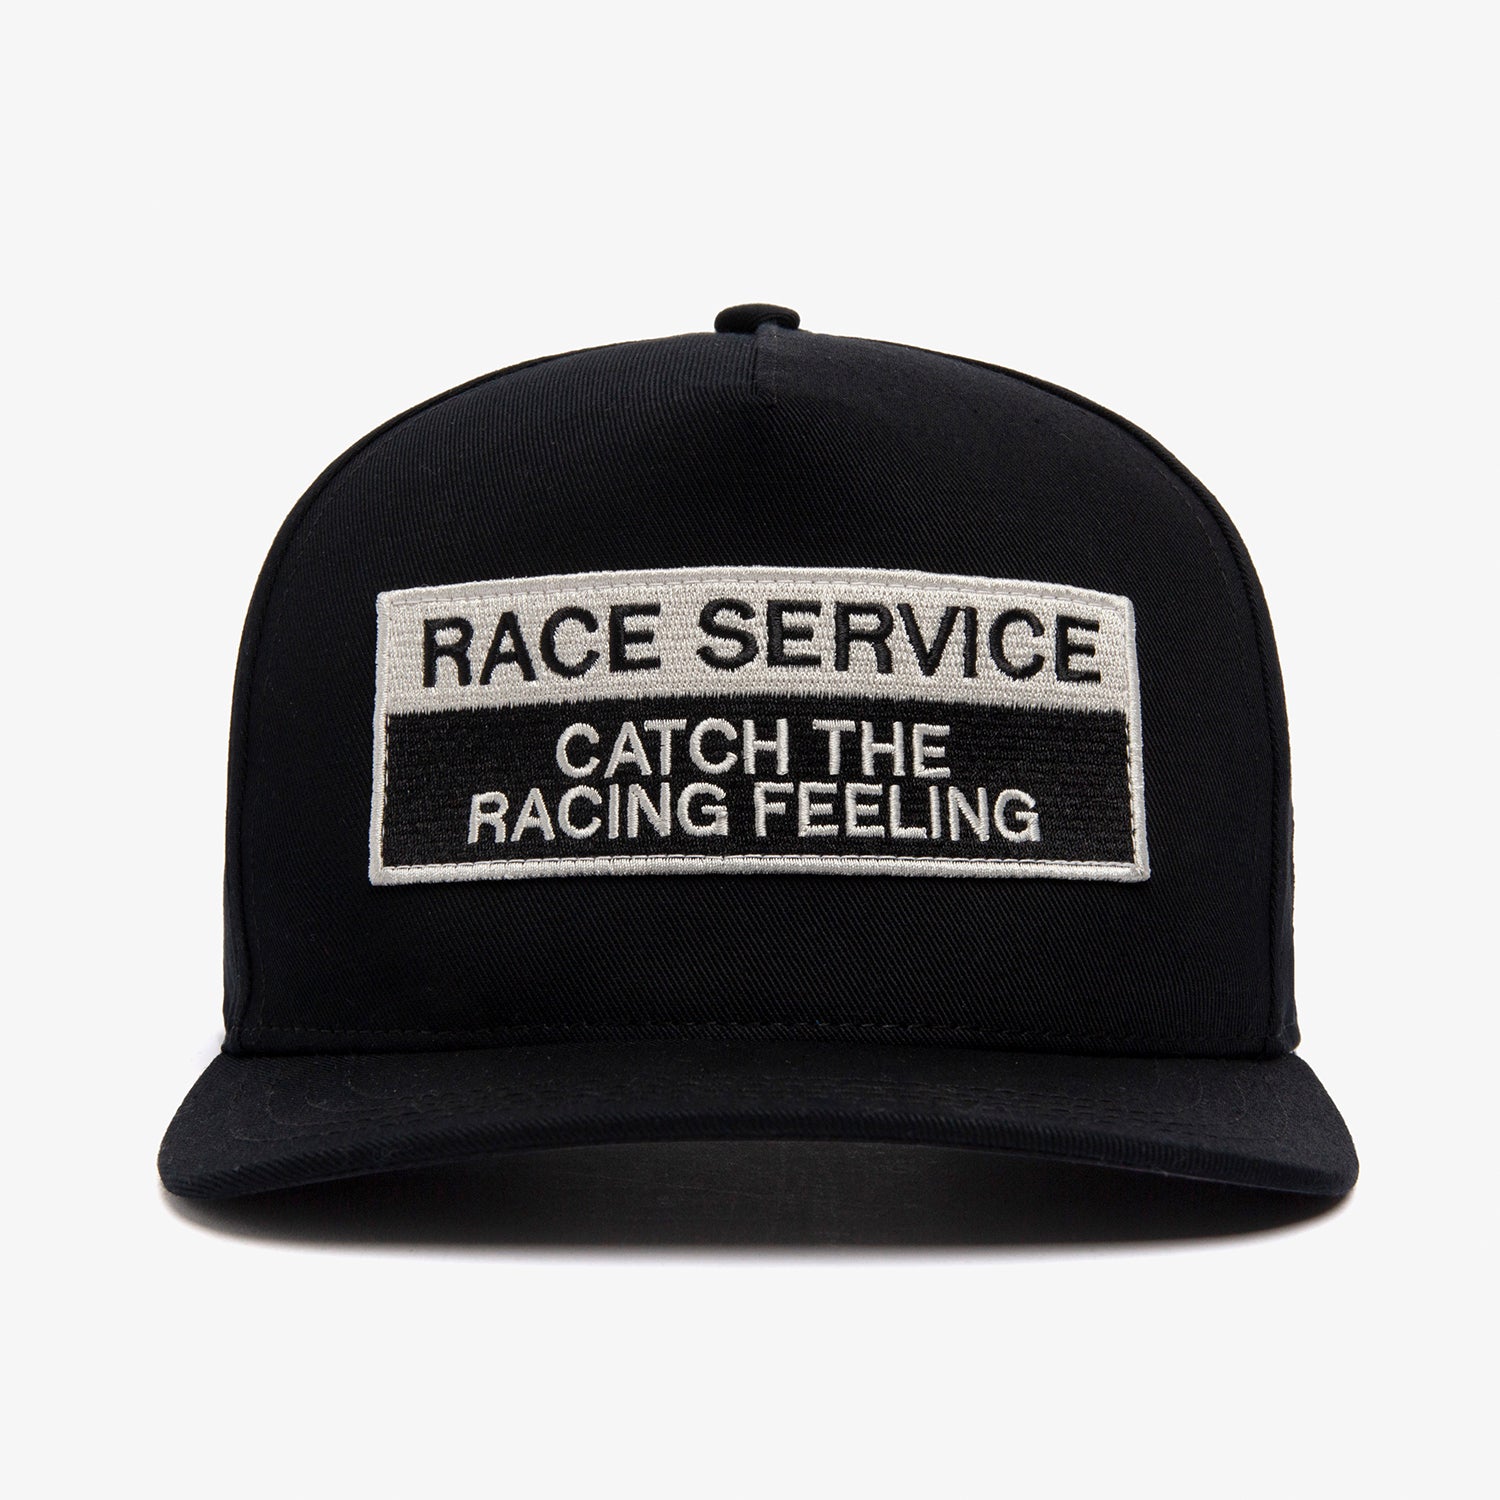 CATCH THE RACING FEELING HAT